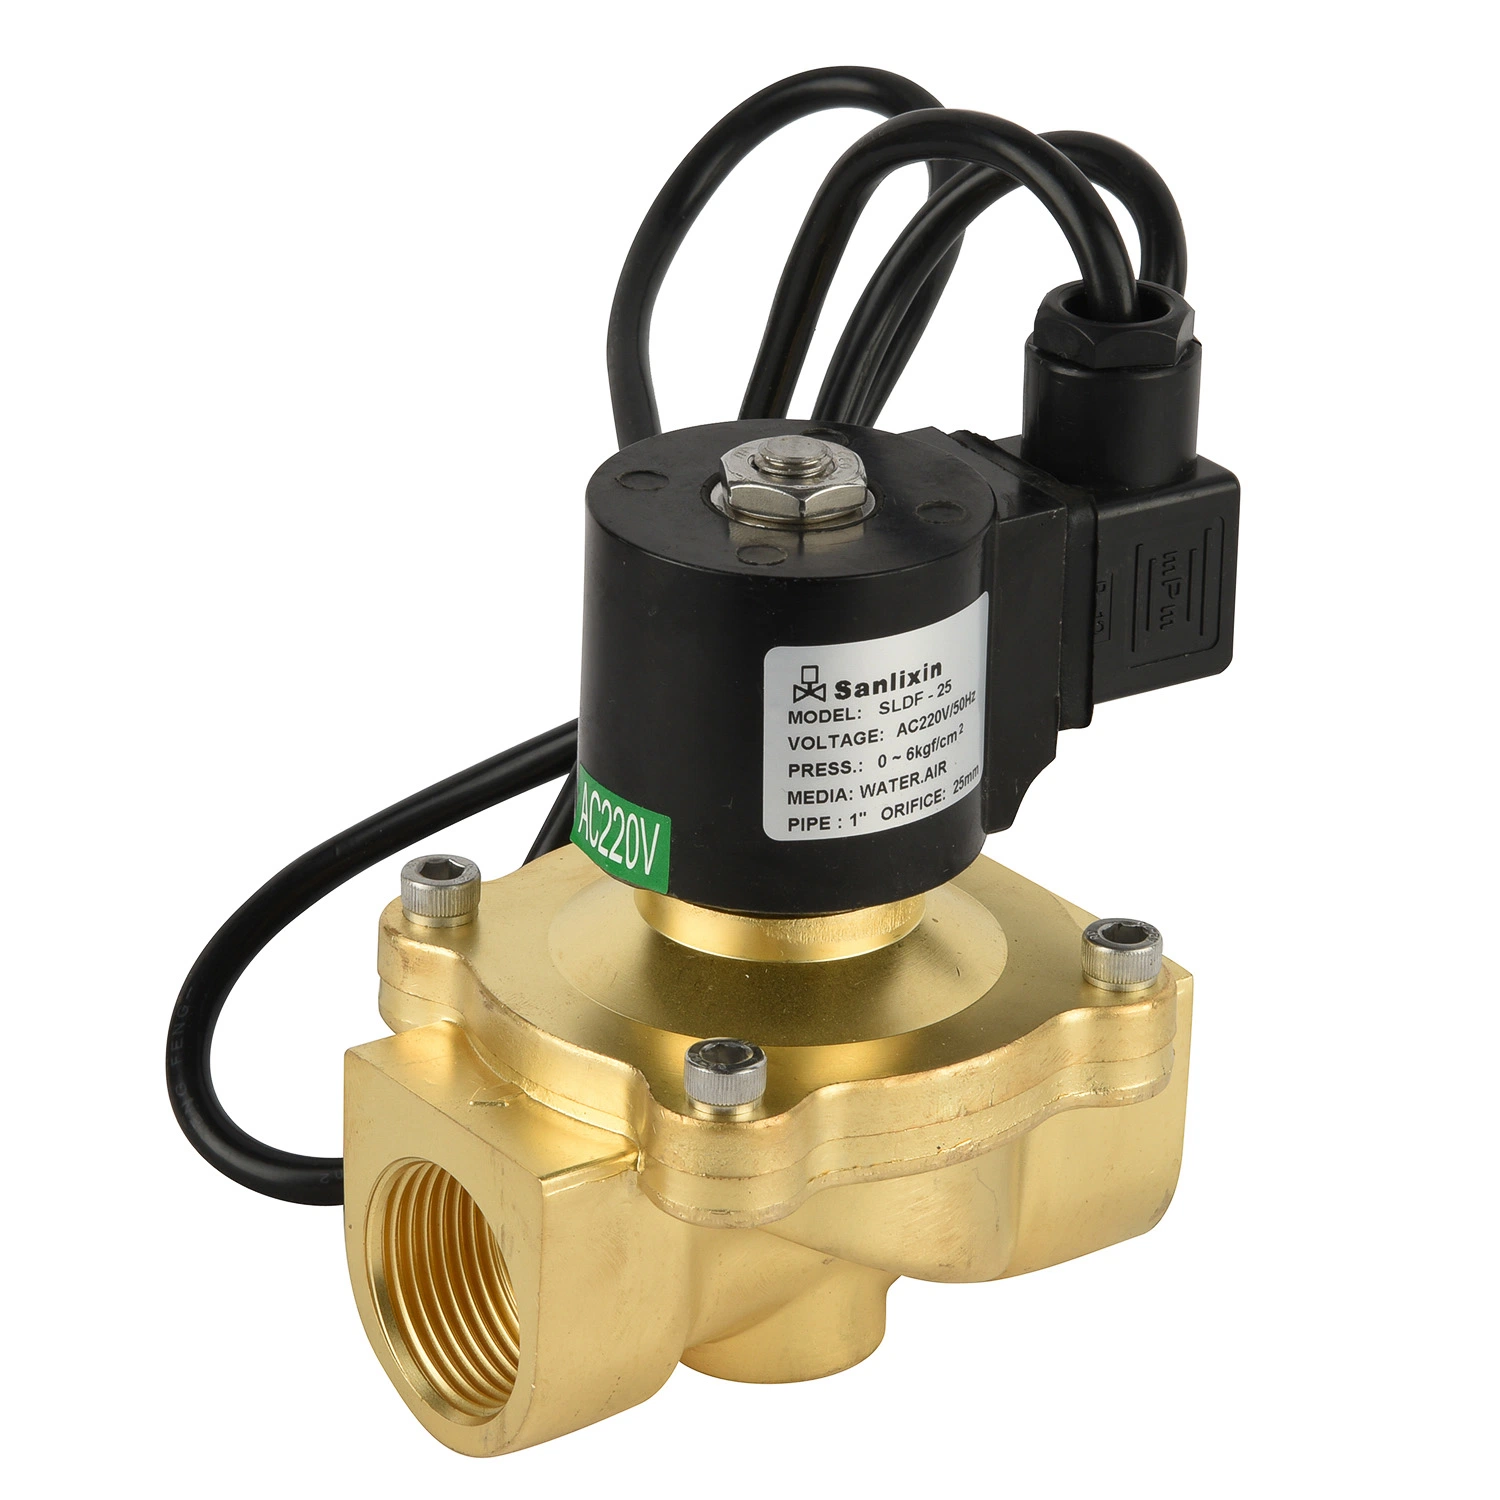 Normally Closed Solenoid Valve Good for Spring - Under Water (SLDF SERIES)